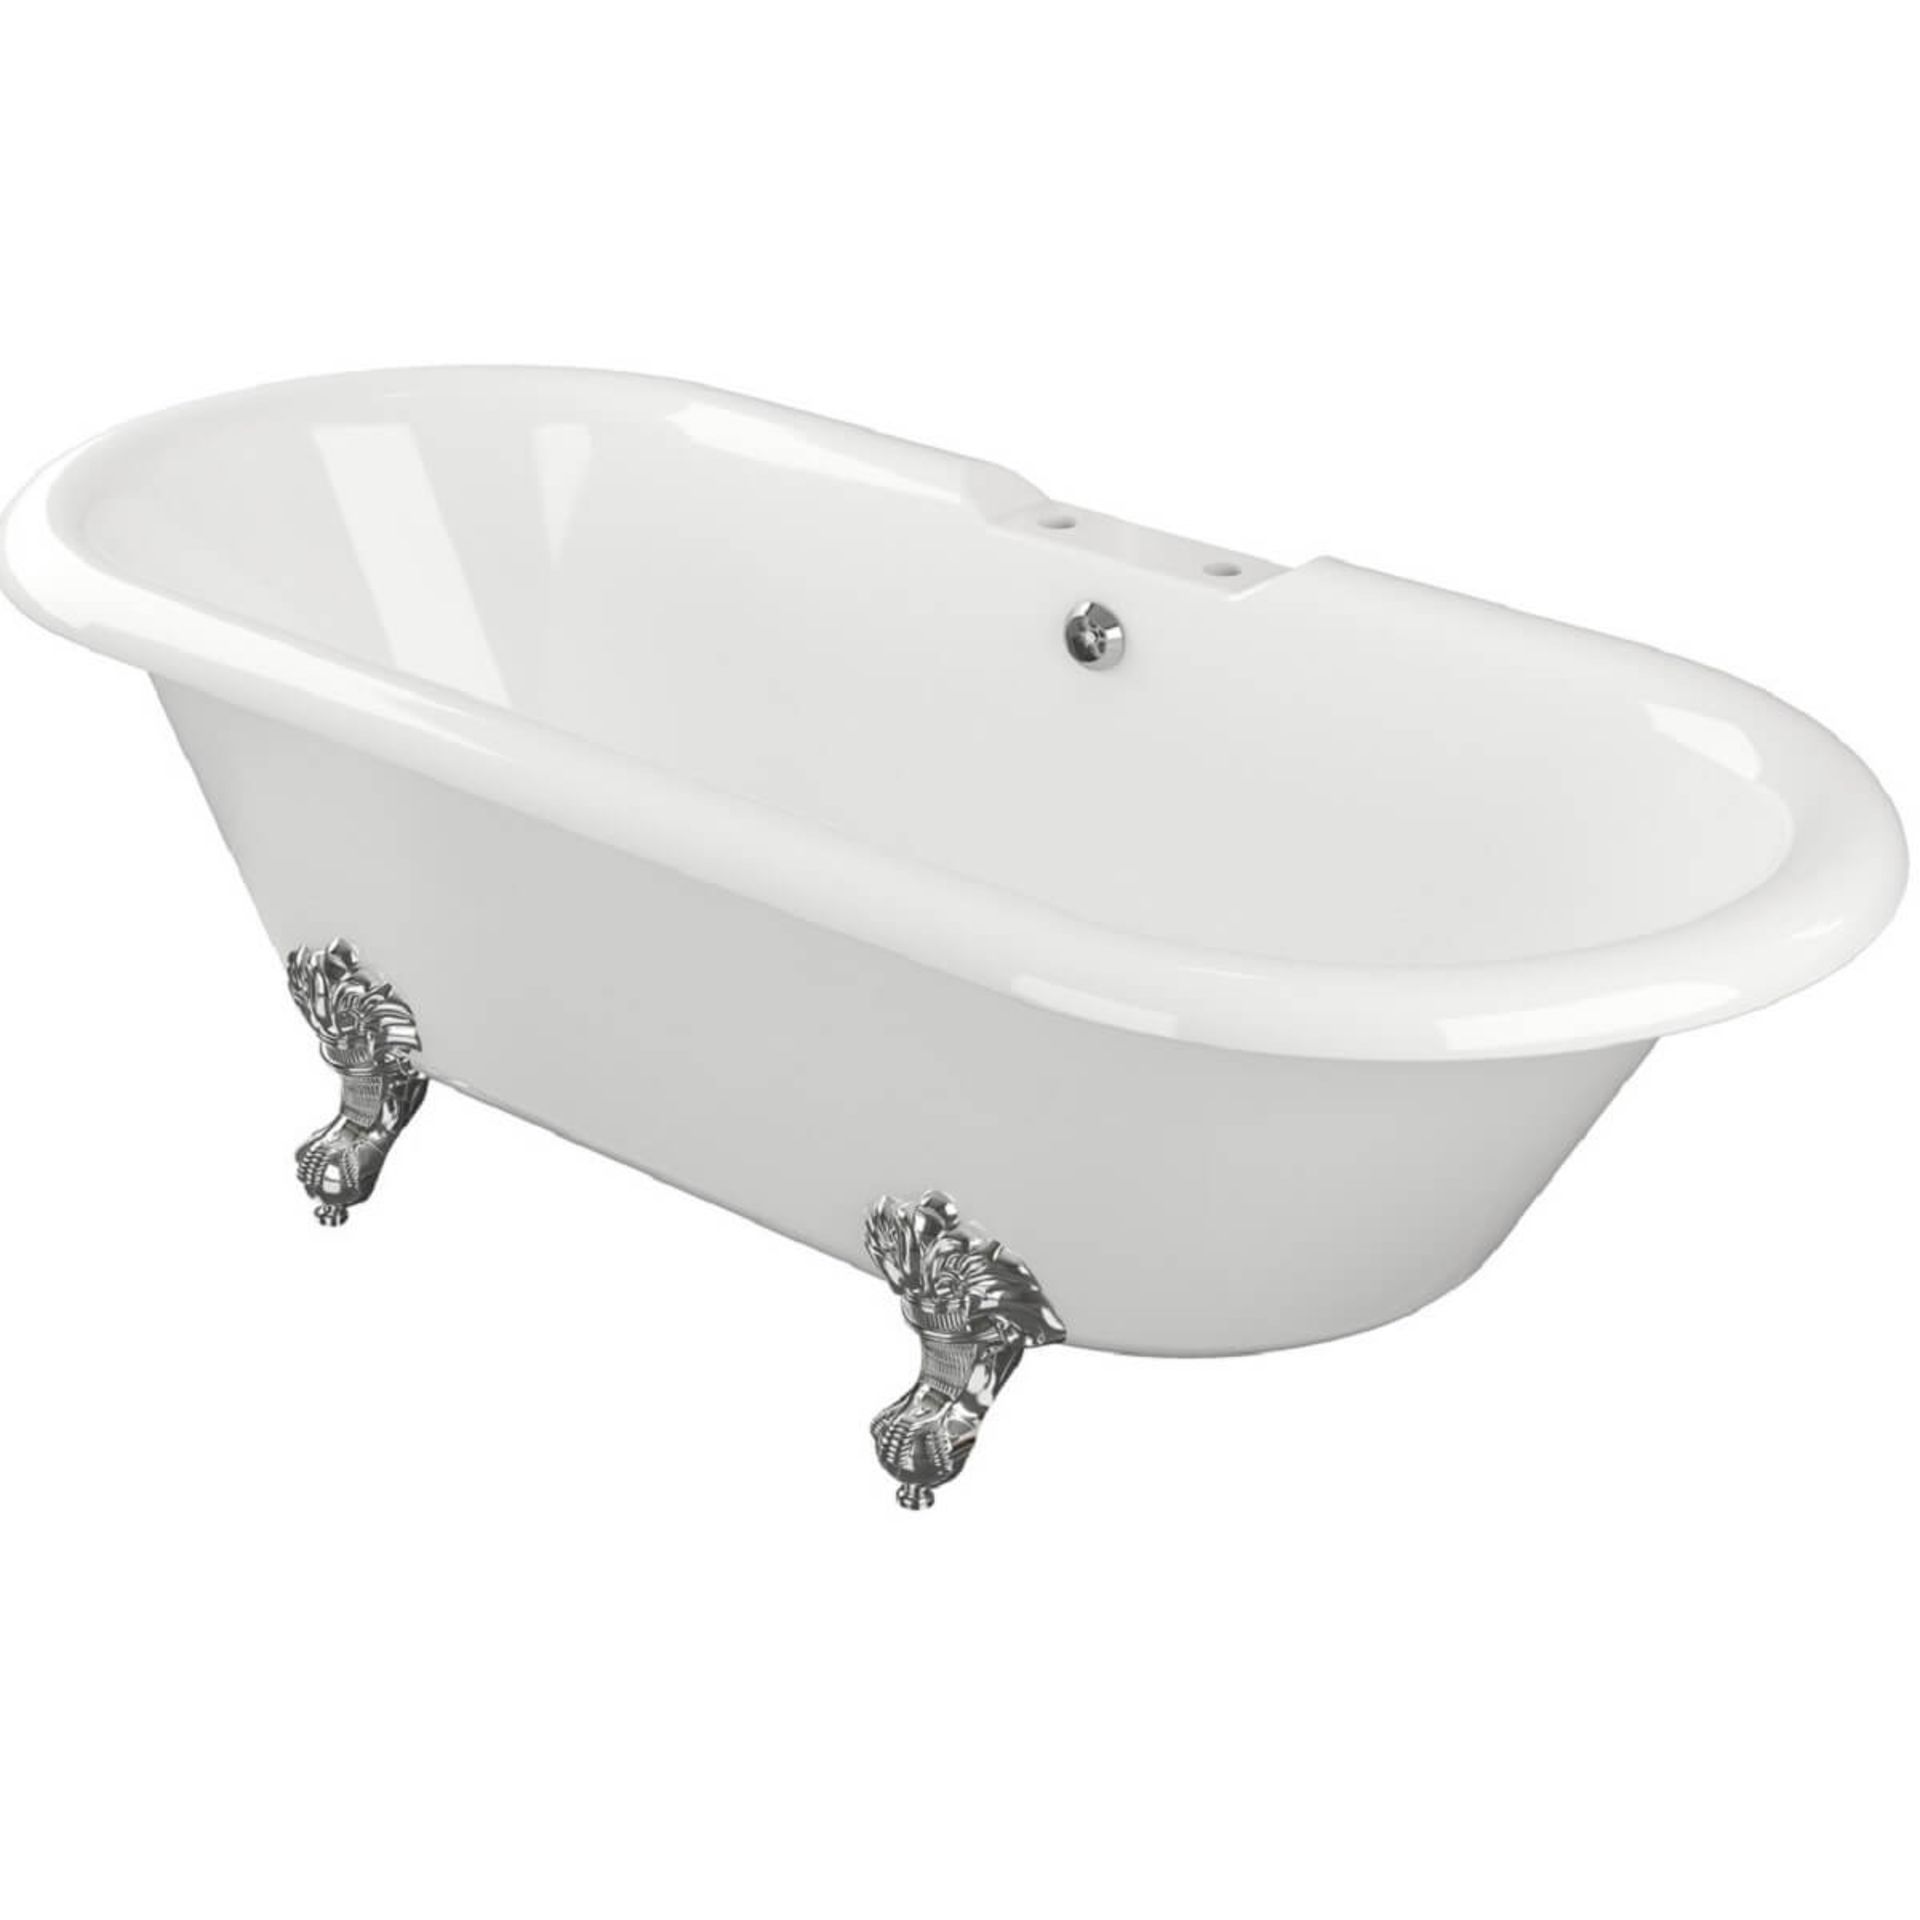 New (E1) 1690 x 740 x 620mm Richmond White Roller Top Freestanding Bath With Chrome Ball - Image 2 of 2